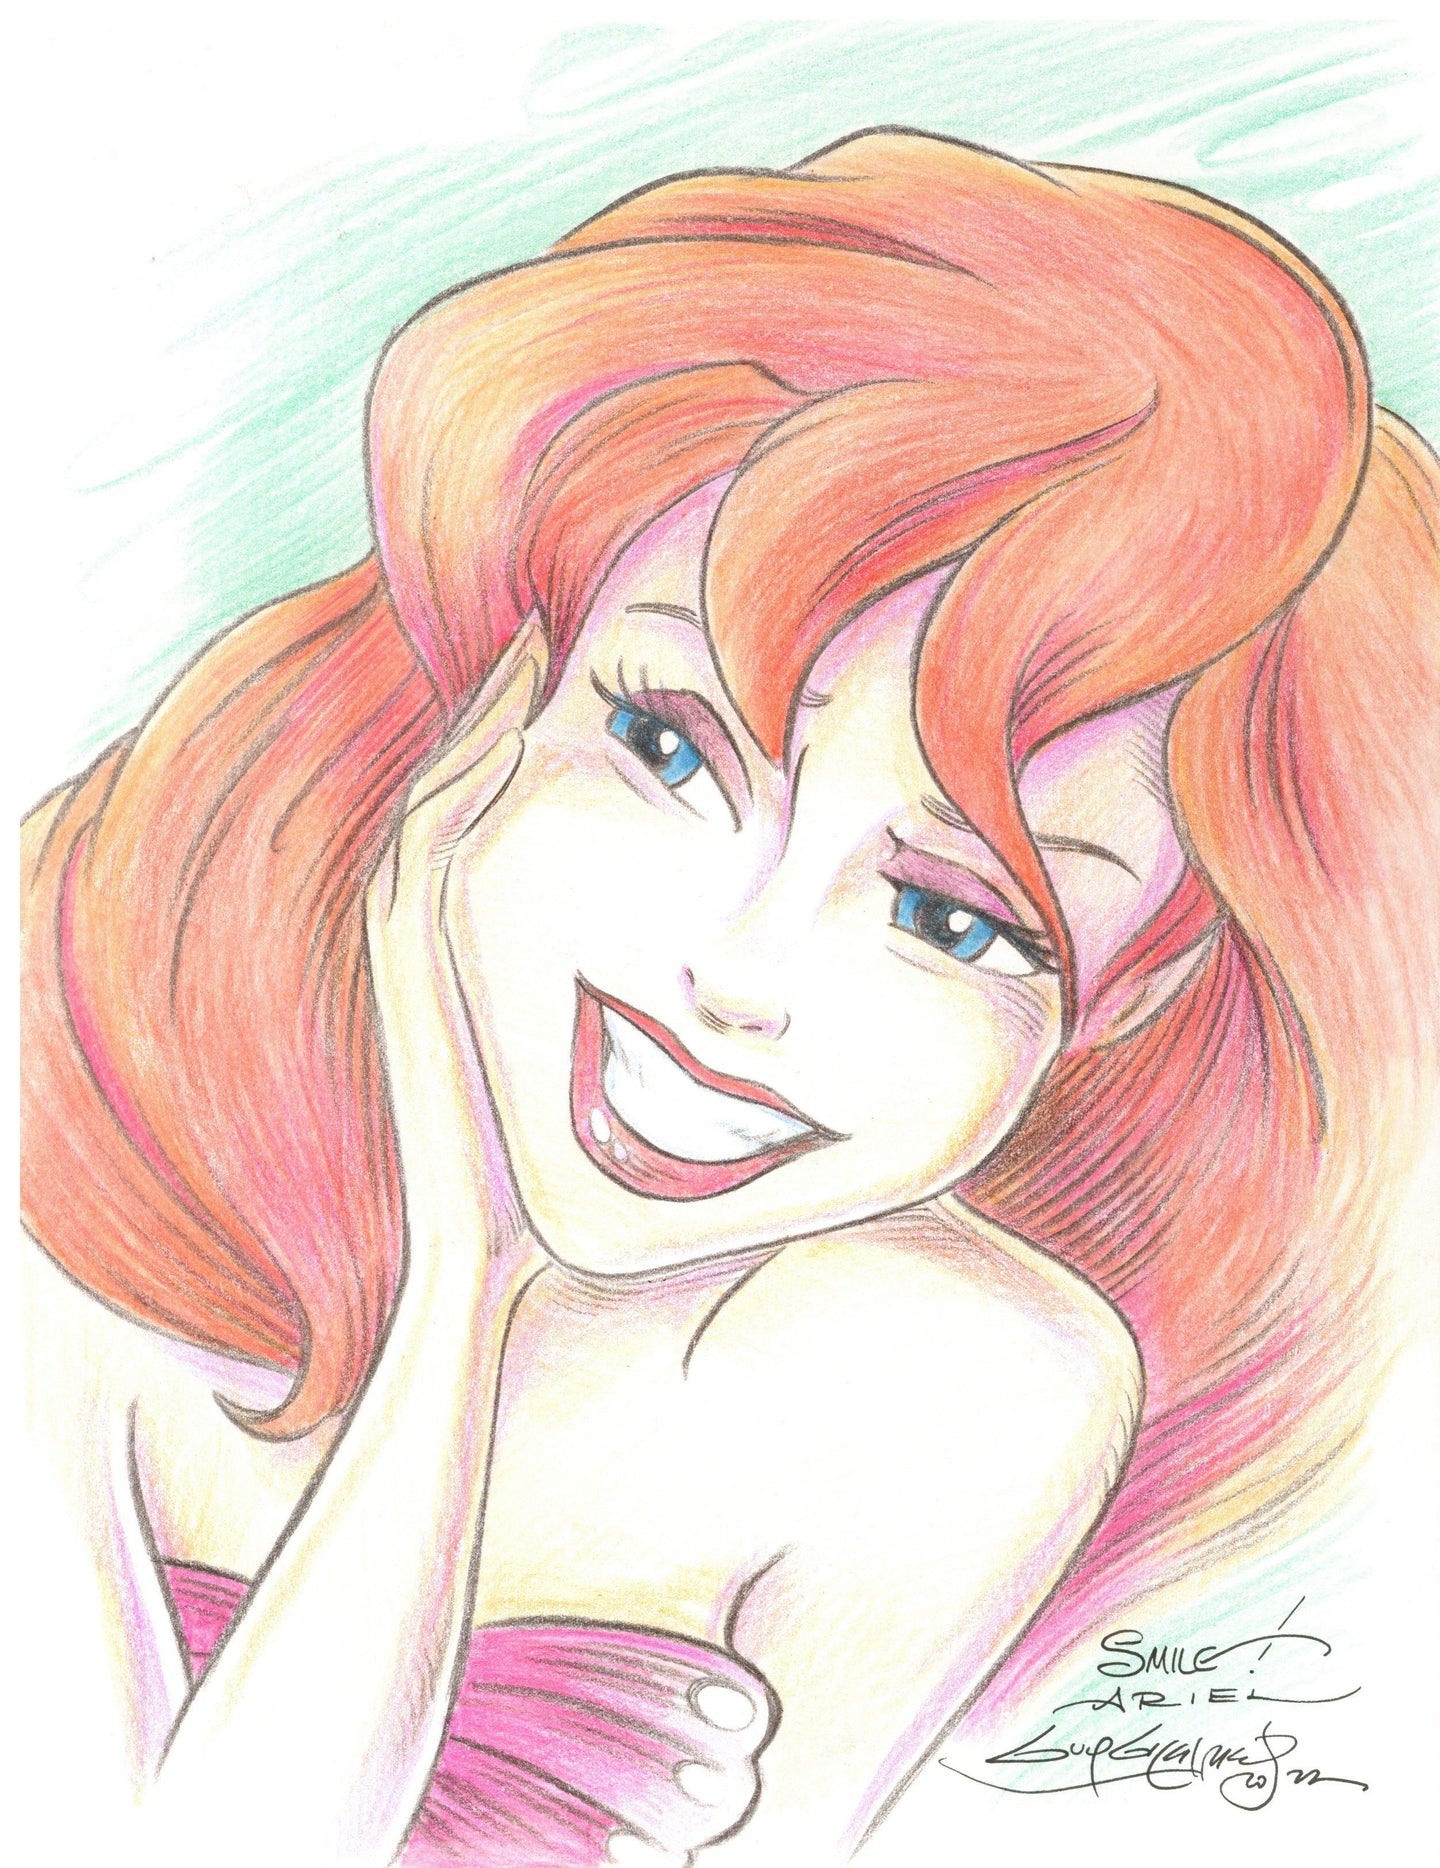 The Little Mermaid Ariel Original Art 8.5x11 Sketch - Created by Guy Gilchrist